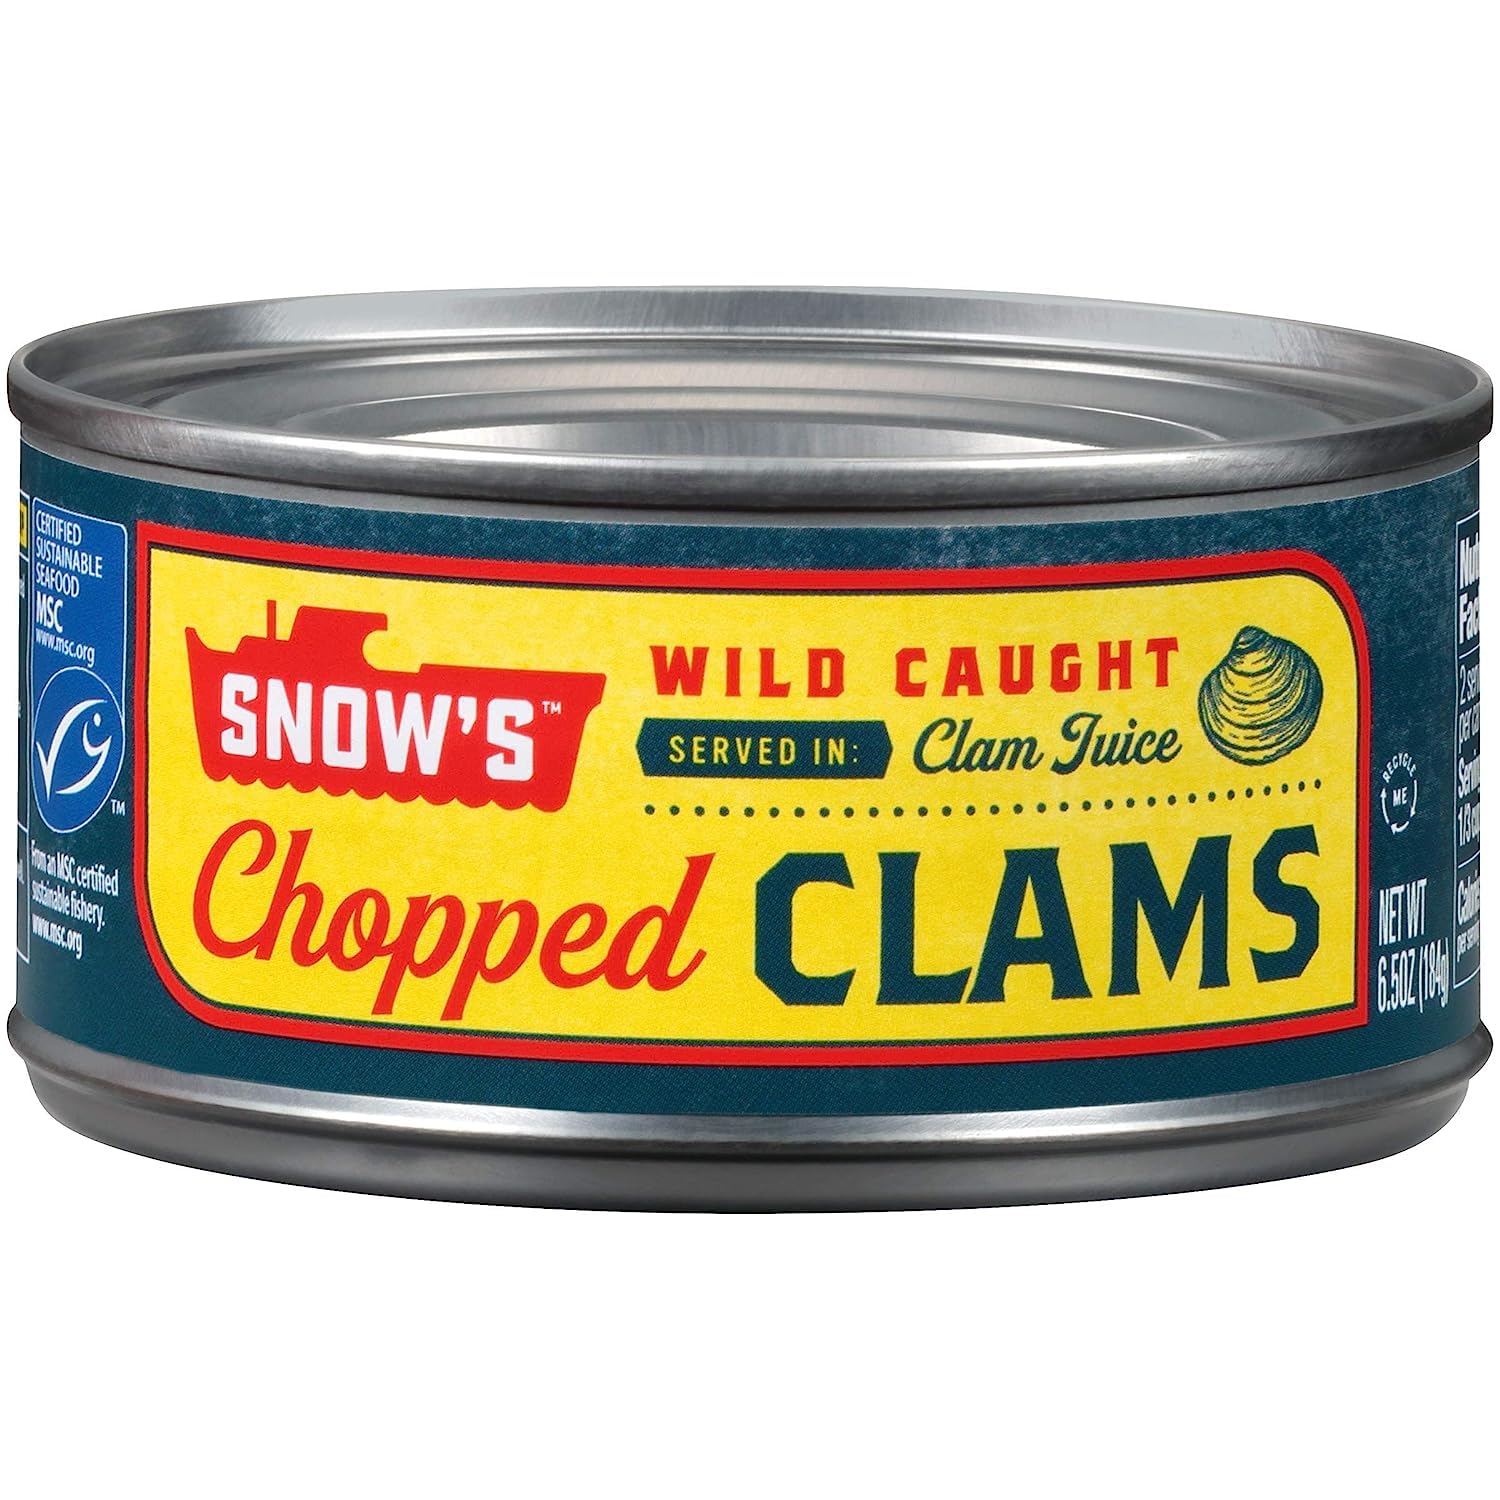 6-Pack 6.5-Oz Snow's Wild Caught Chopped Clams $5.95 w/ S&S + Free Shipping w/ Prime or on $35+